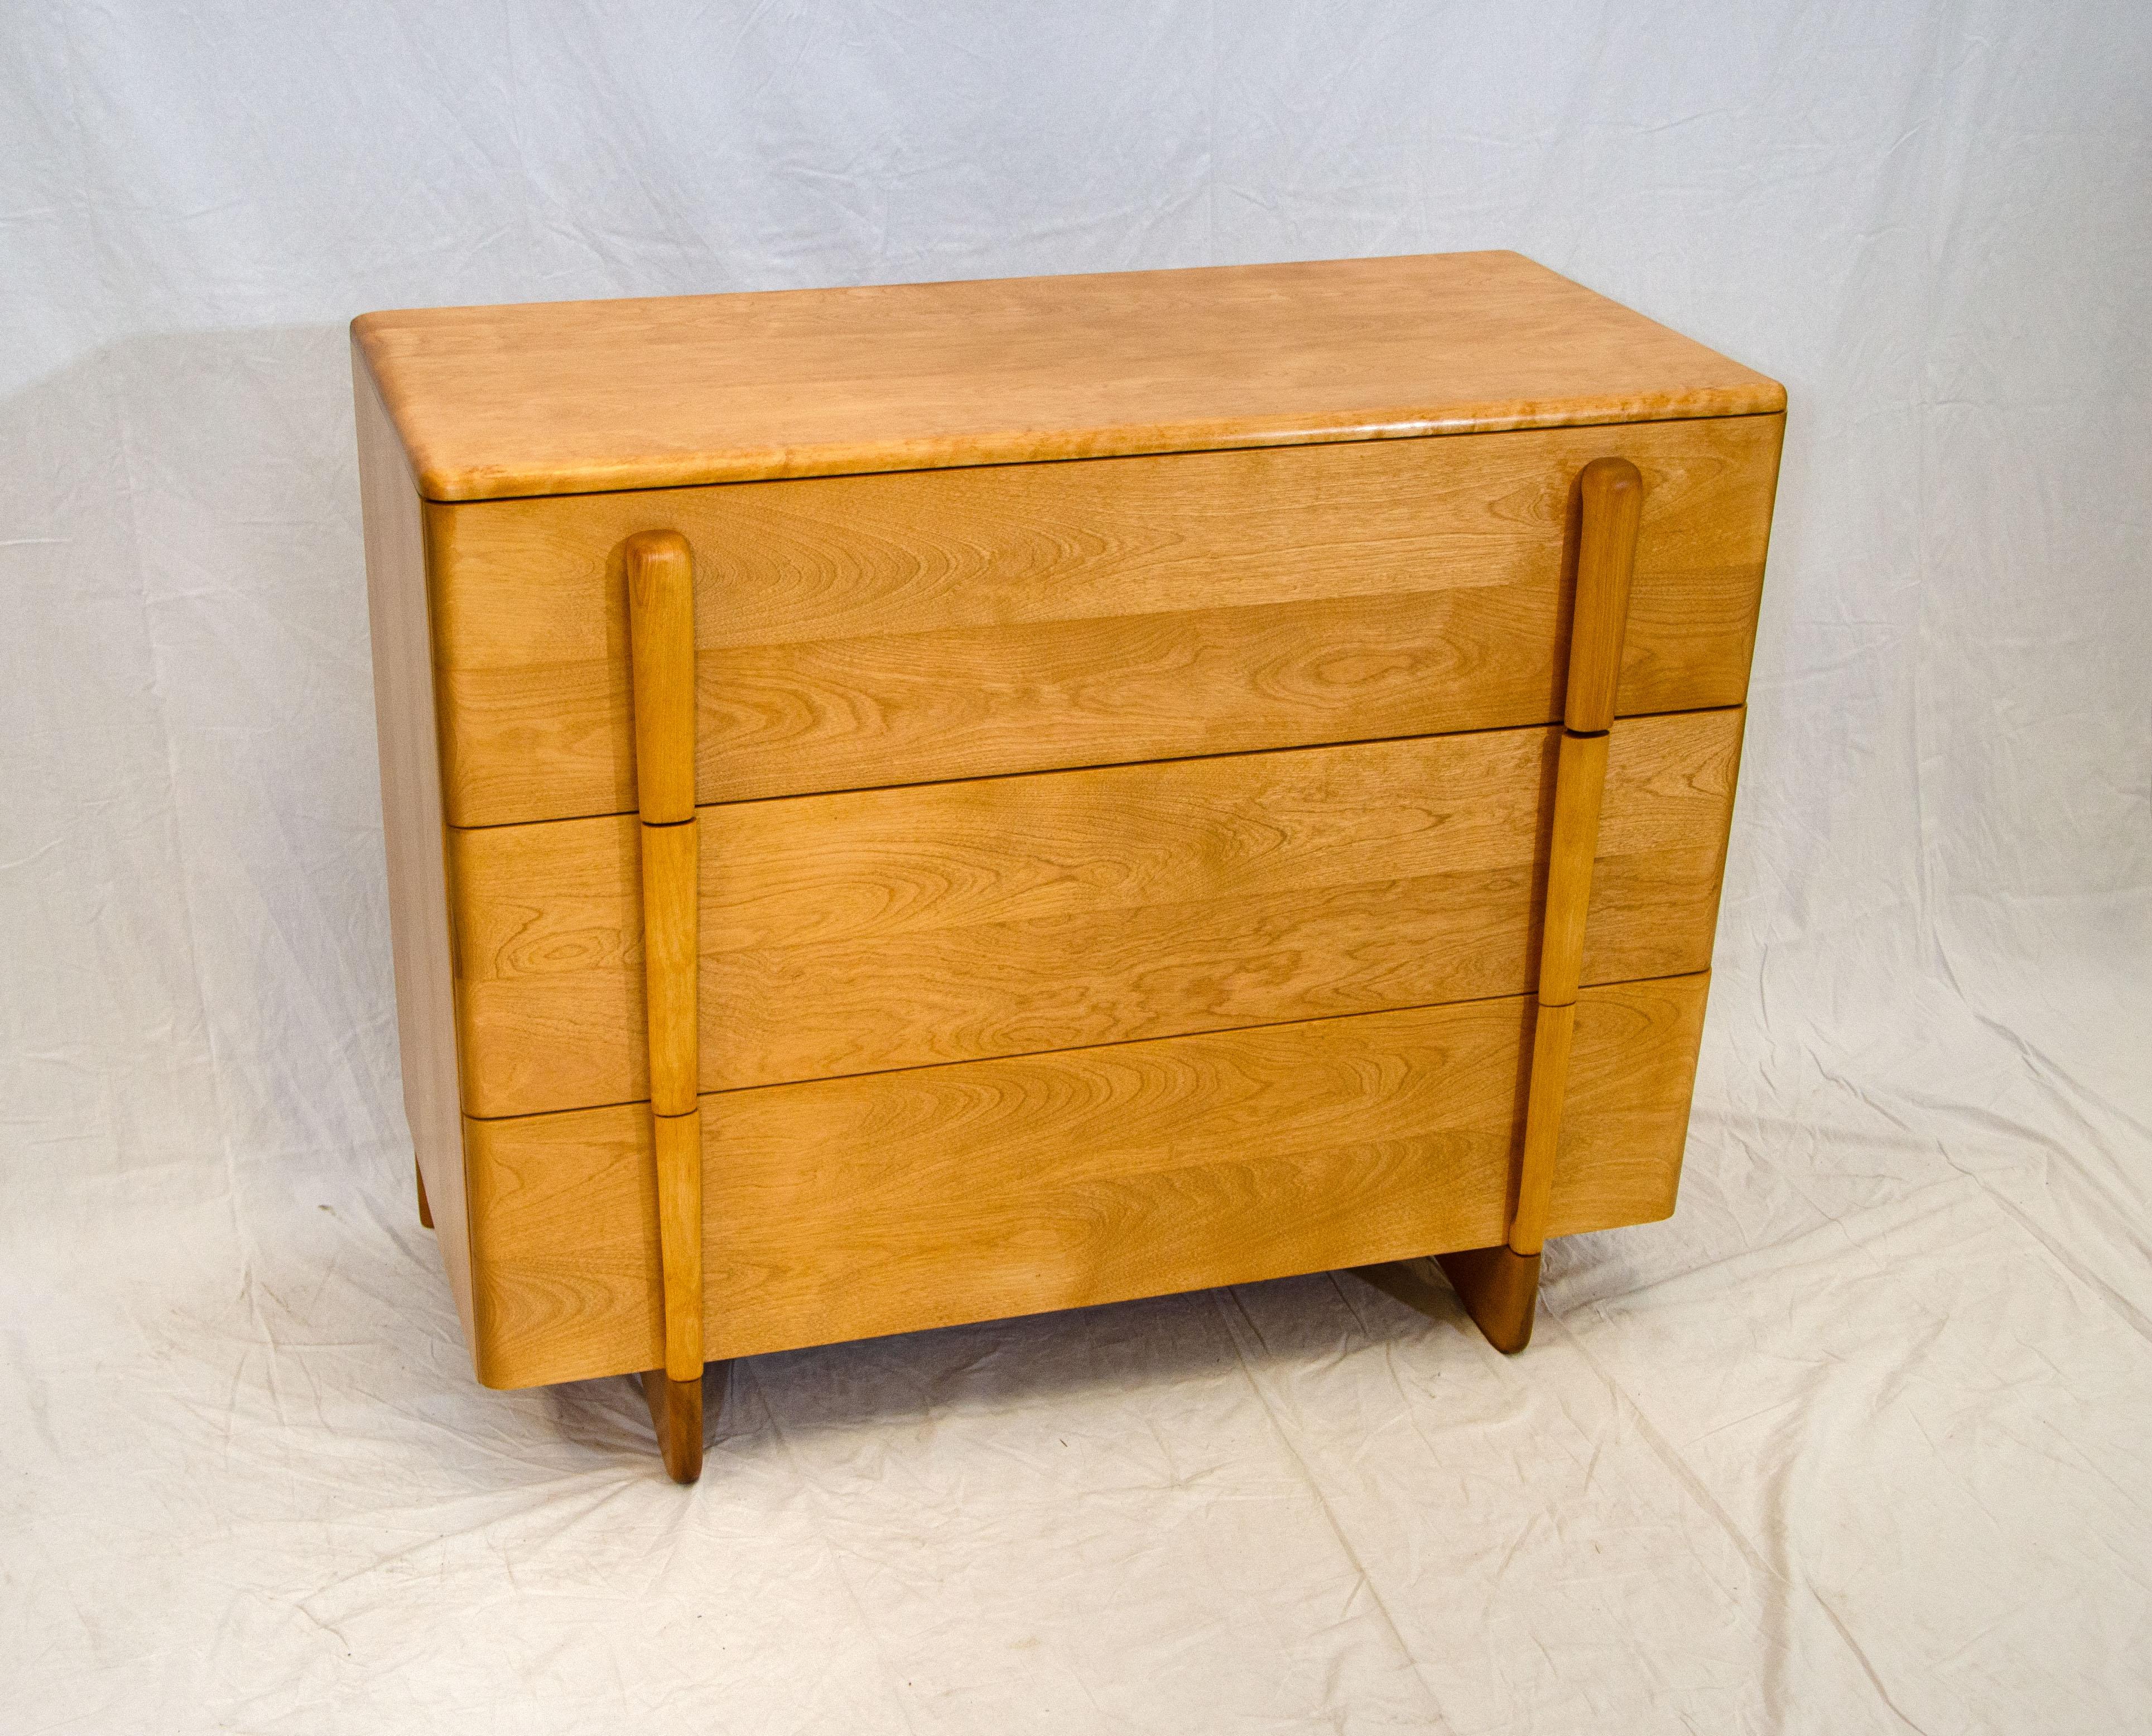 Hard to find a Heywood Wakefield Skyliner dresser/chest with vertically aligned handles and unusual feet to give it a floating appearance. The three large drawers are 8